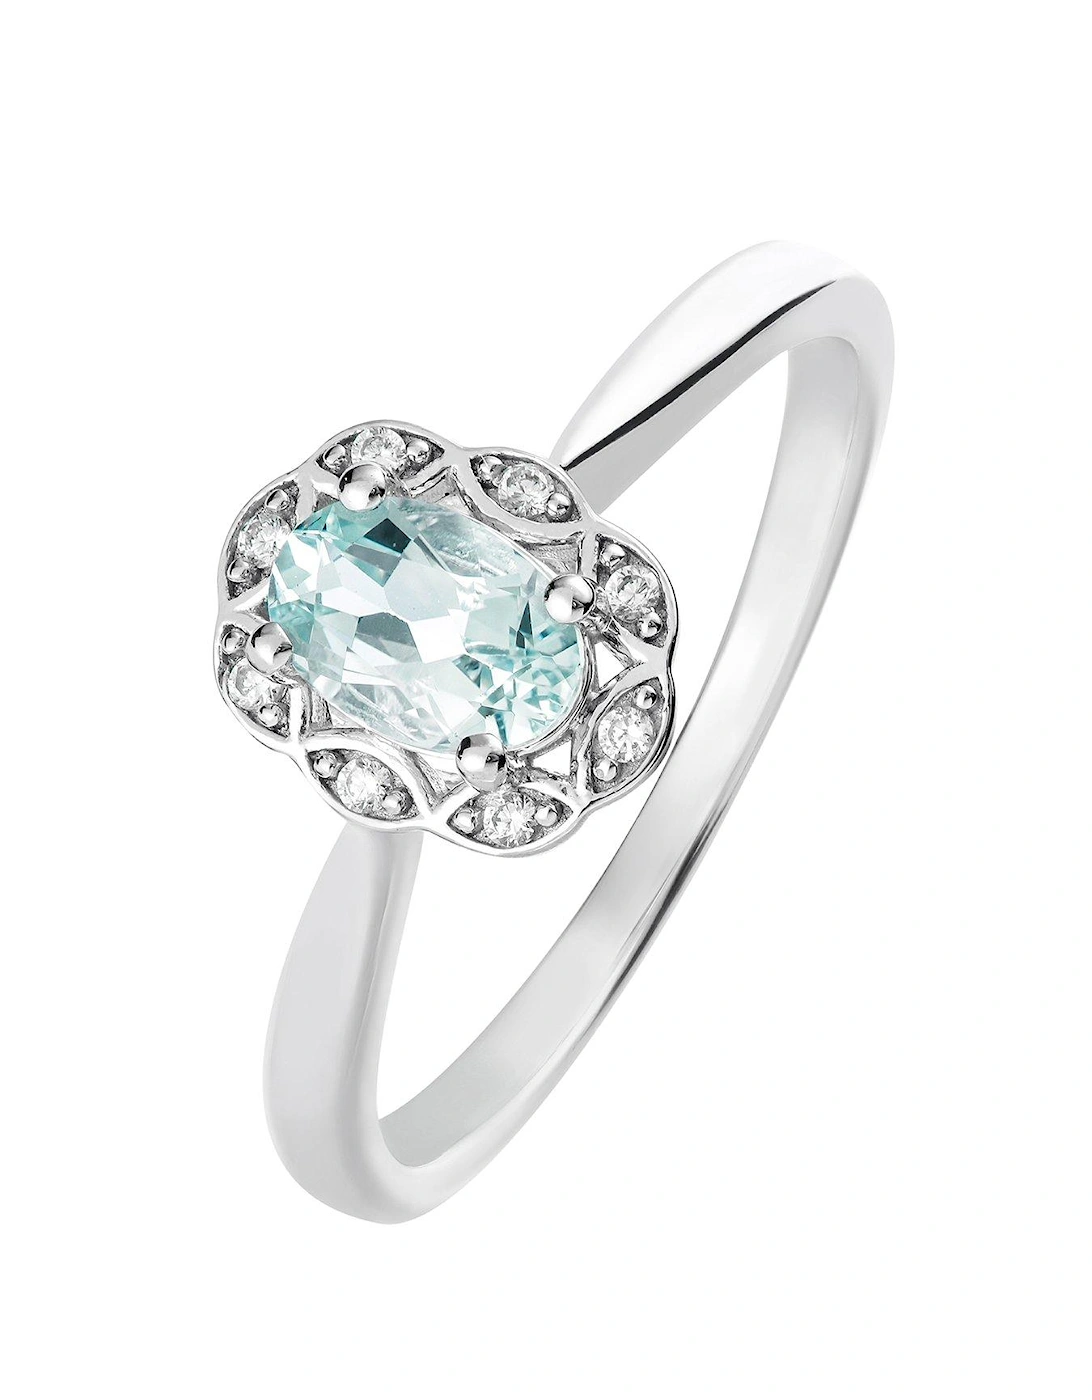 Arrosa 9ct White Gold 6*4mm Oval Aquamarine and Diamond Ring, 2 of 1